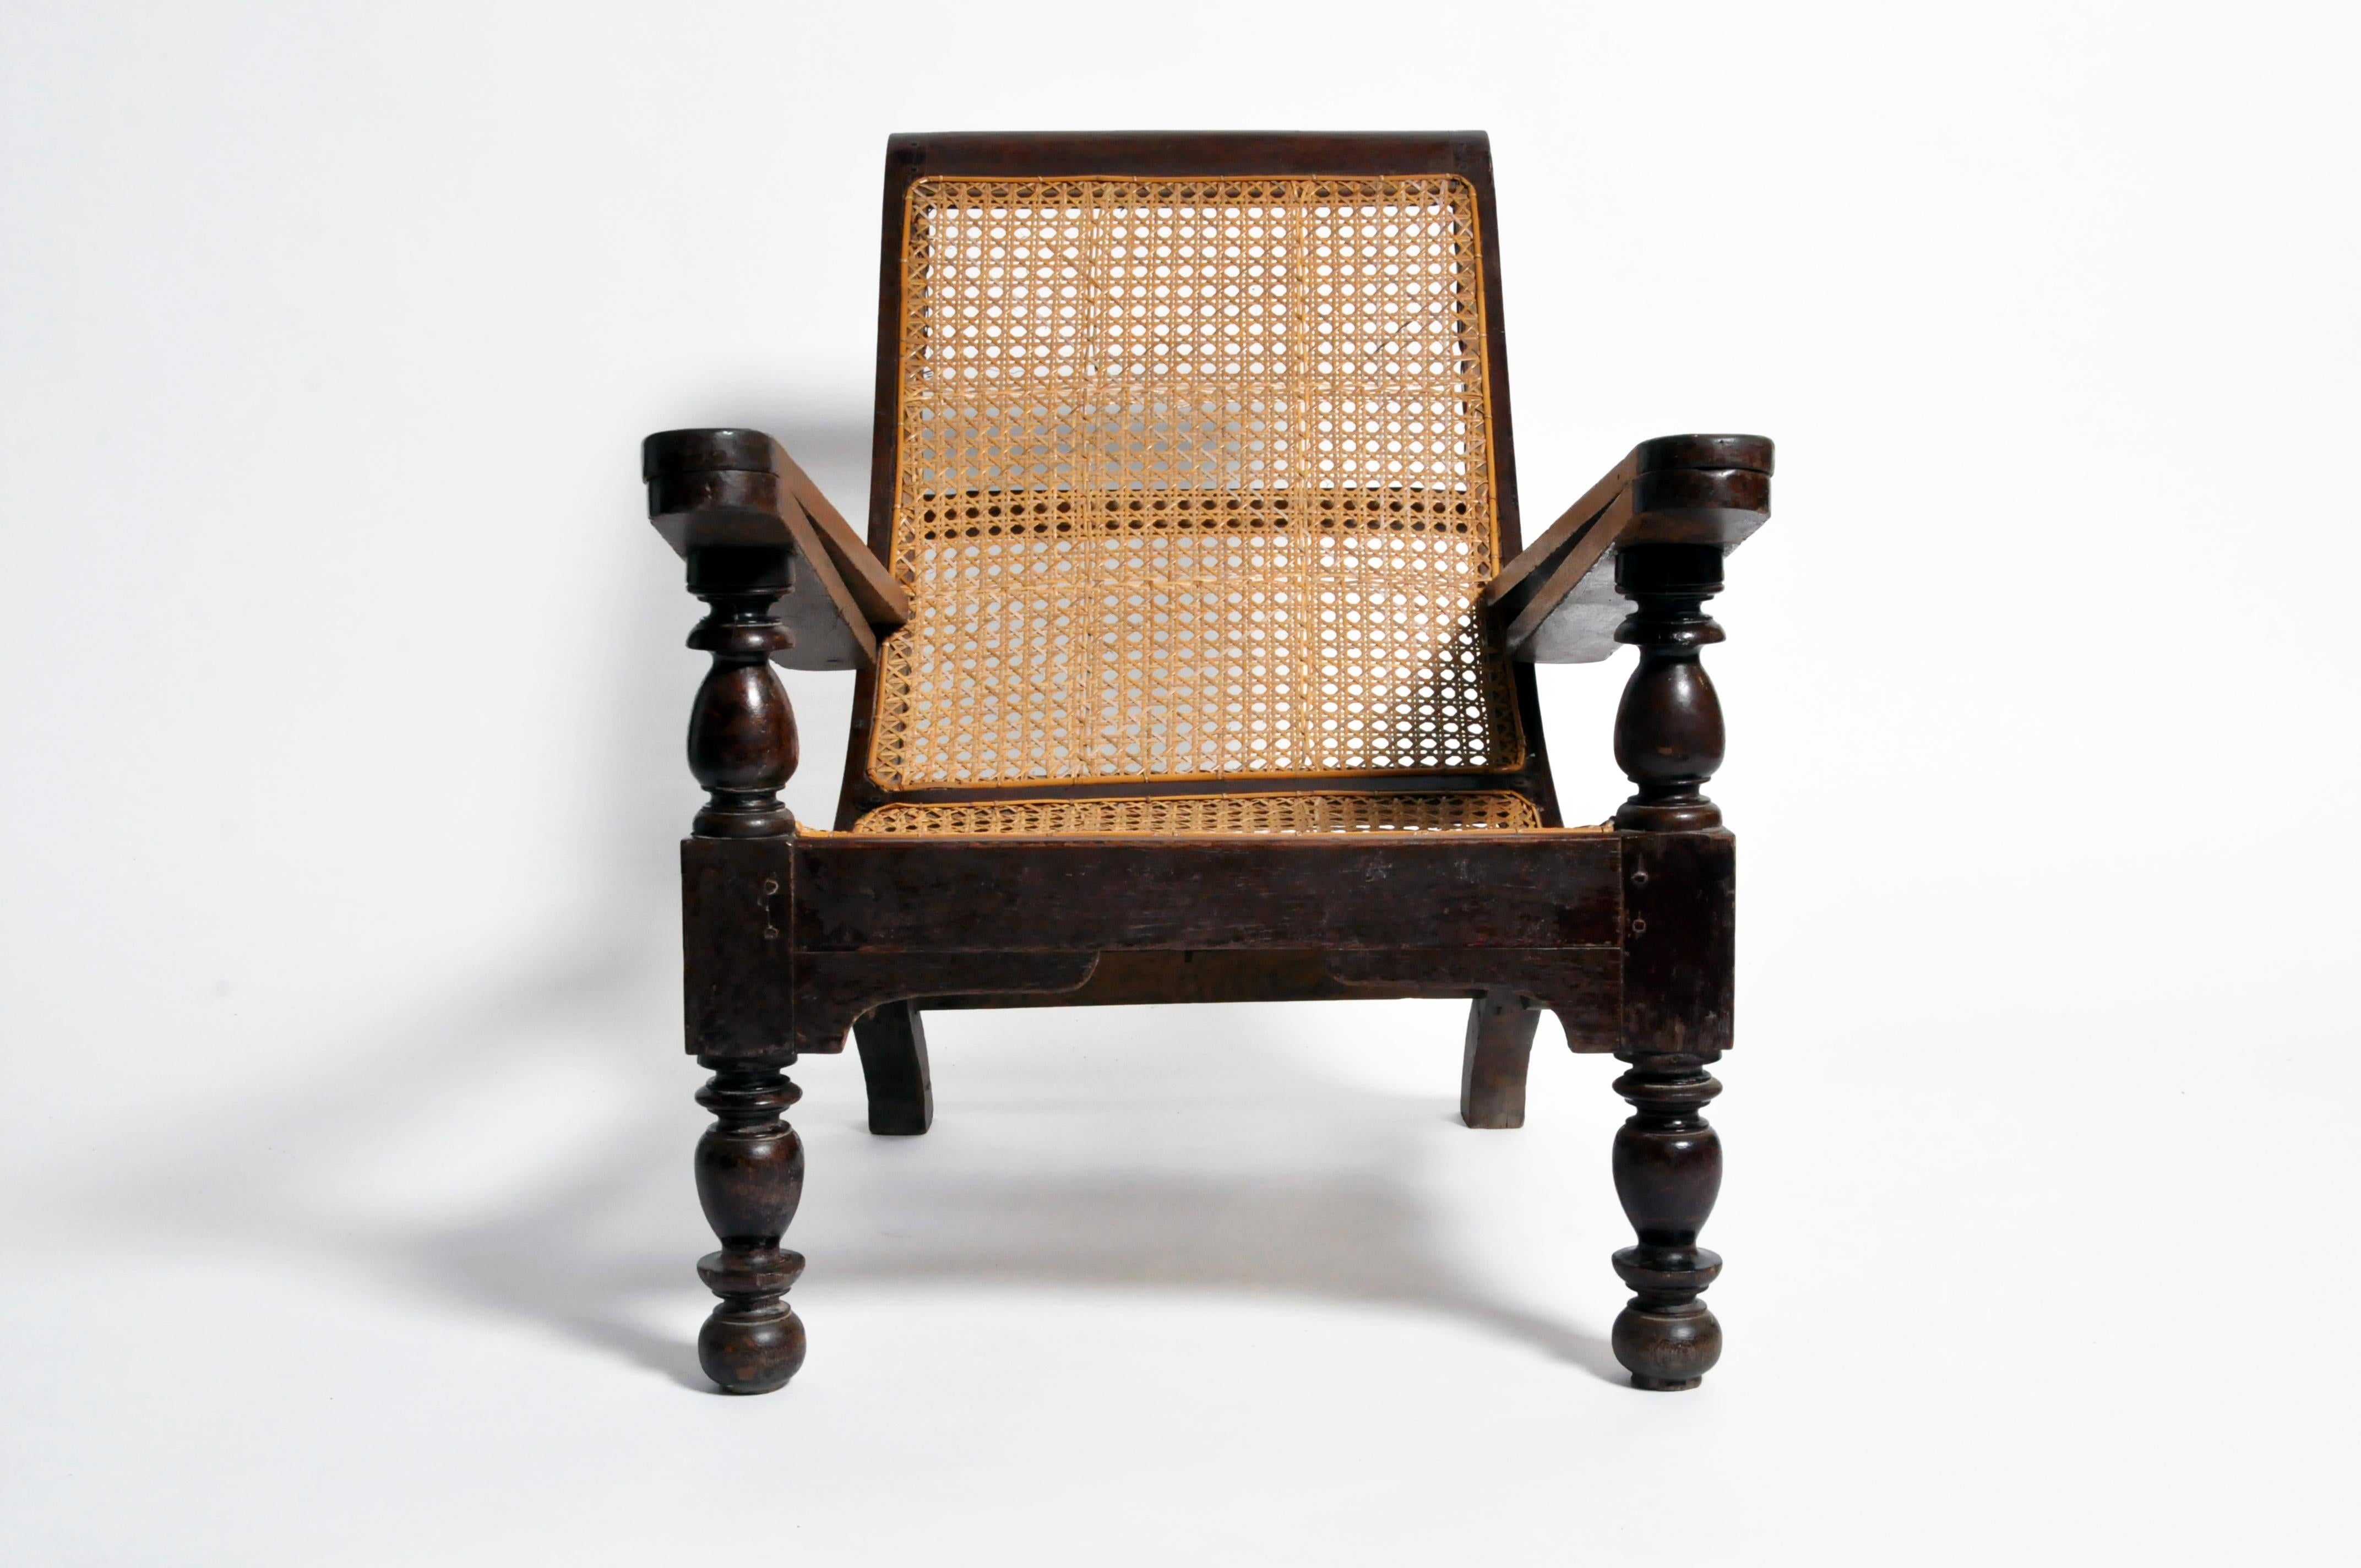 This Indian “plantation chair” was actually an officer’s chair.  British military officers reclined on chairs like these before removing their boots after riding.  The armrest features a swing-out foot rest that elevated one’s legs to alleviate